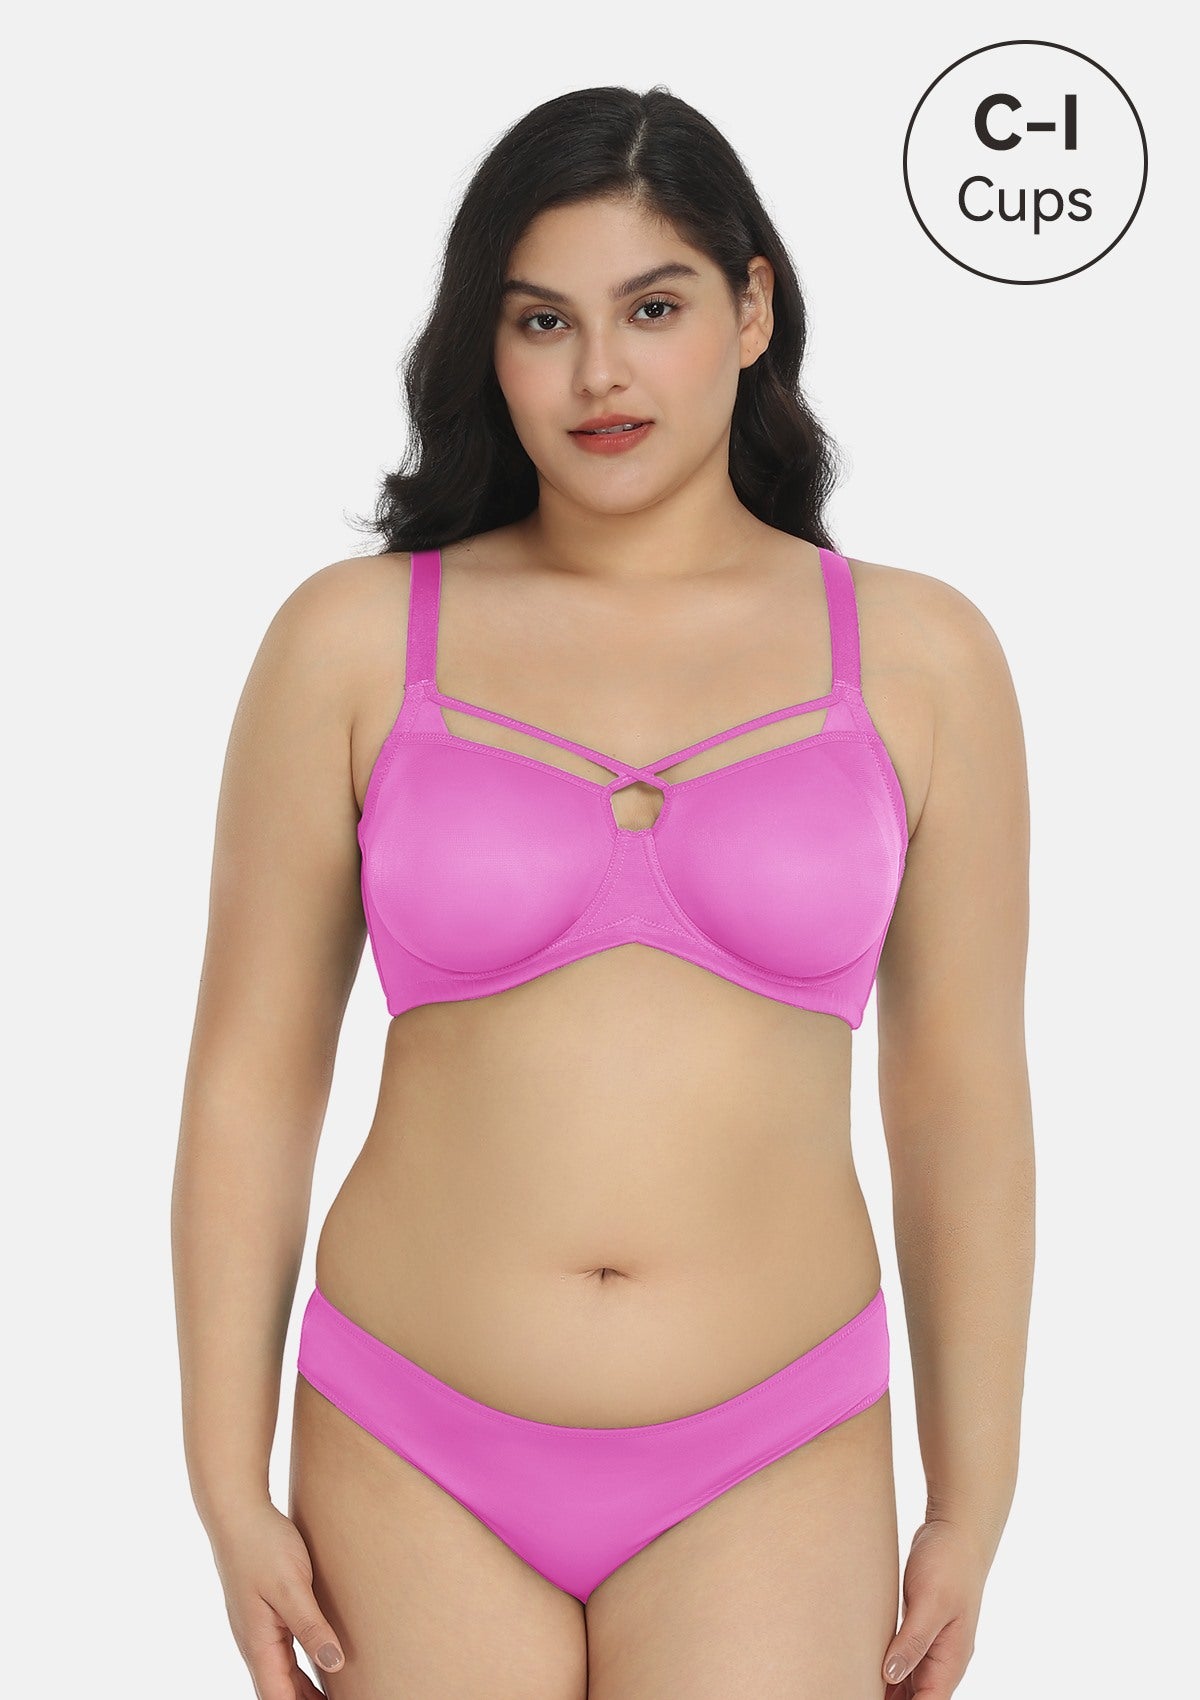 HSIA Billie Cross Front Strap Smooth Sheer Mesh Comfy Underwire Bra - Barbie Pink / 40 / DD/E